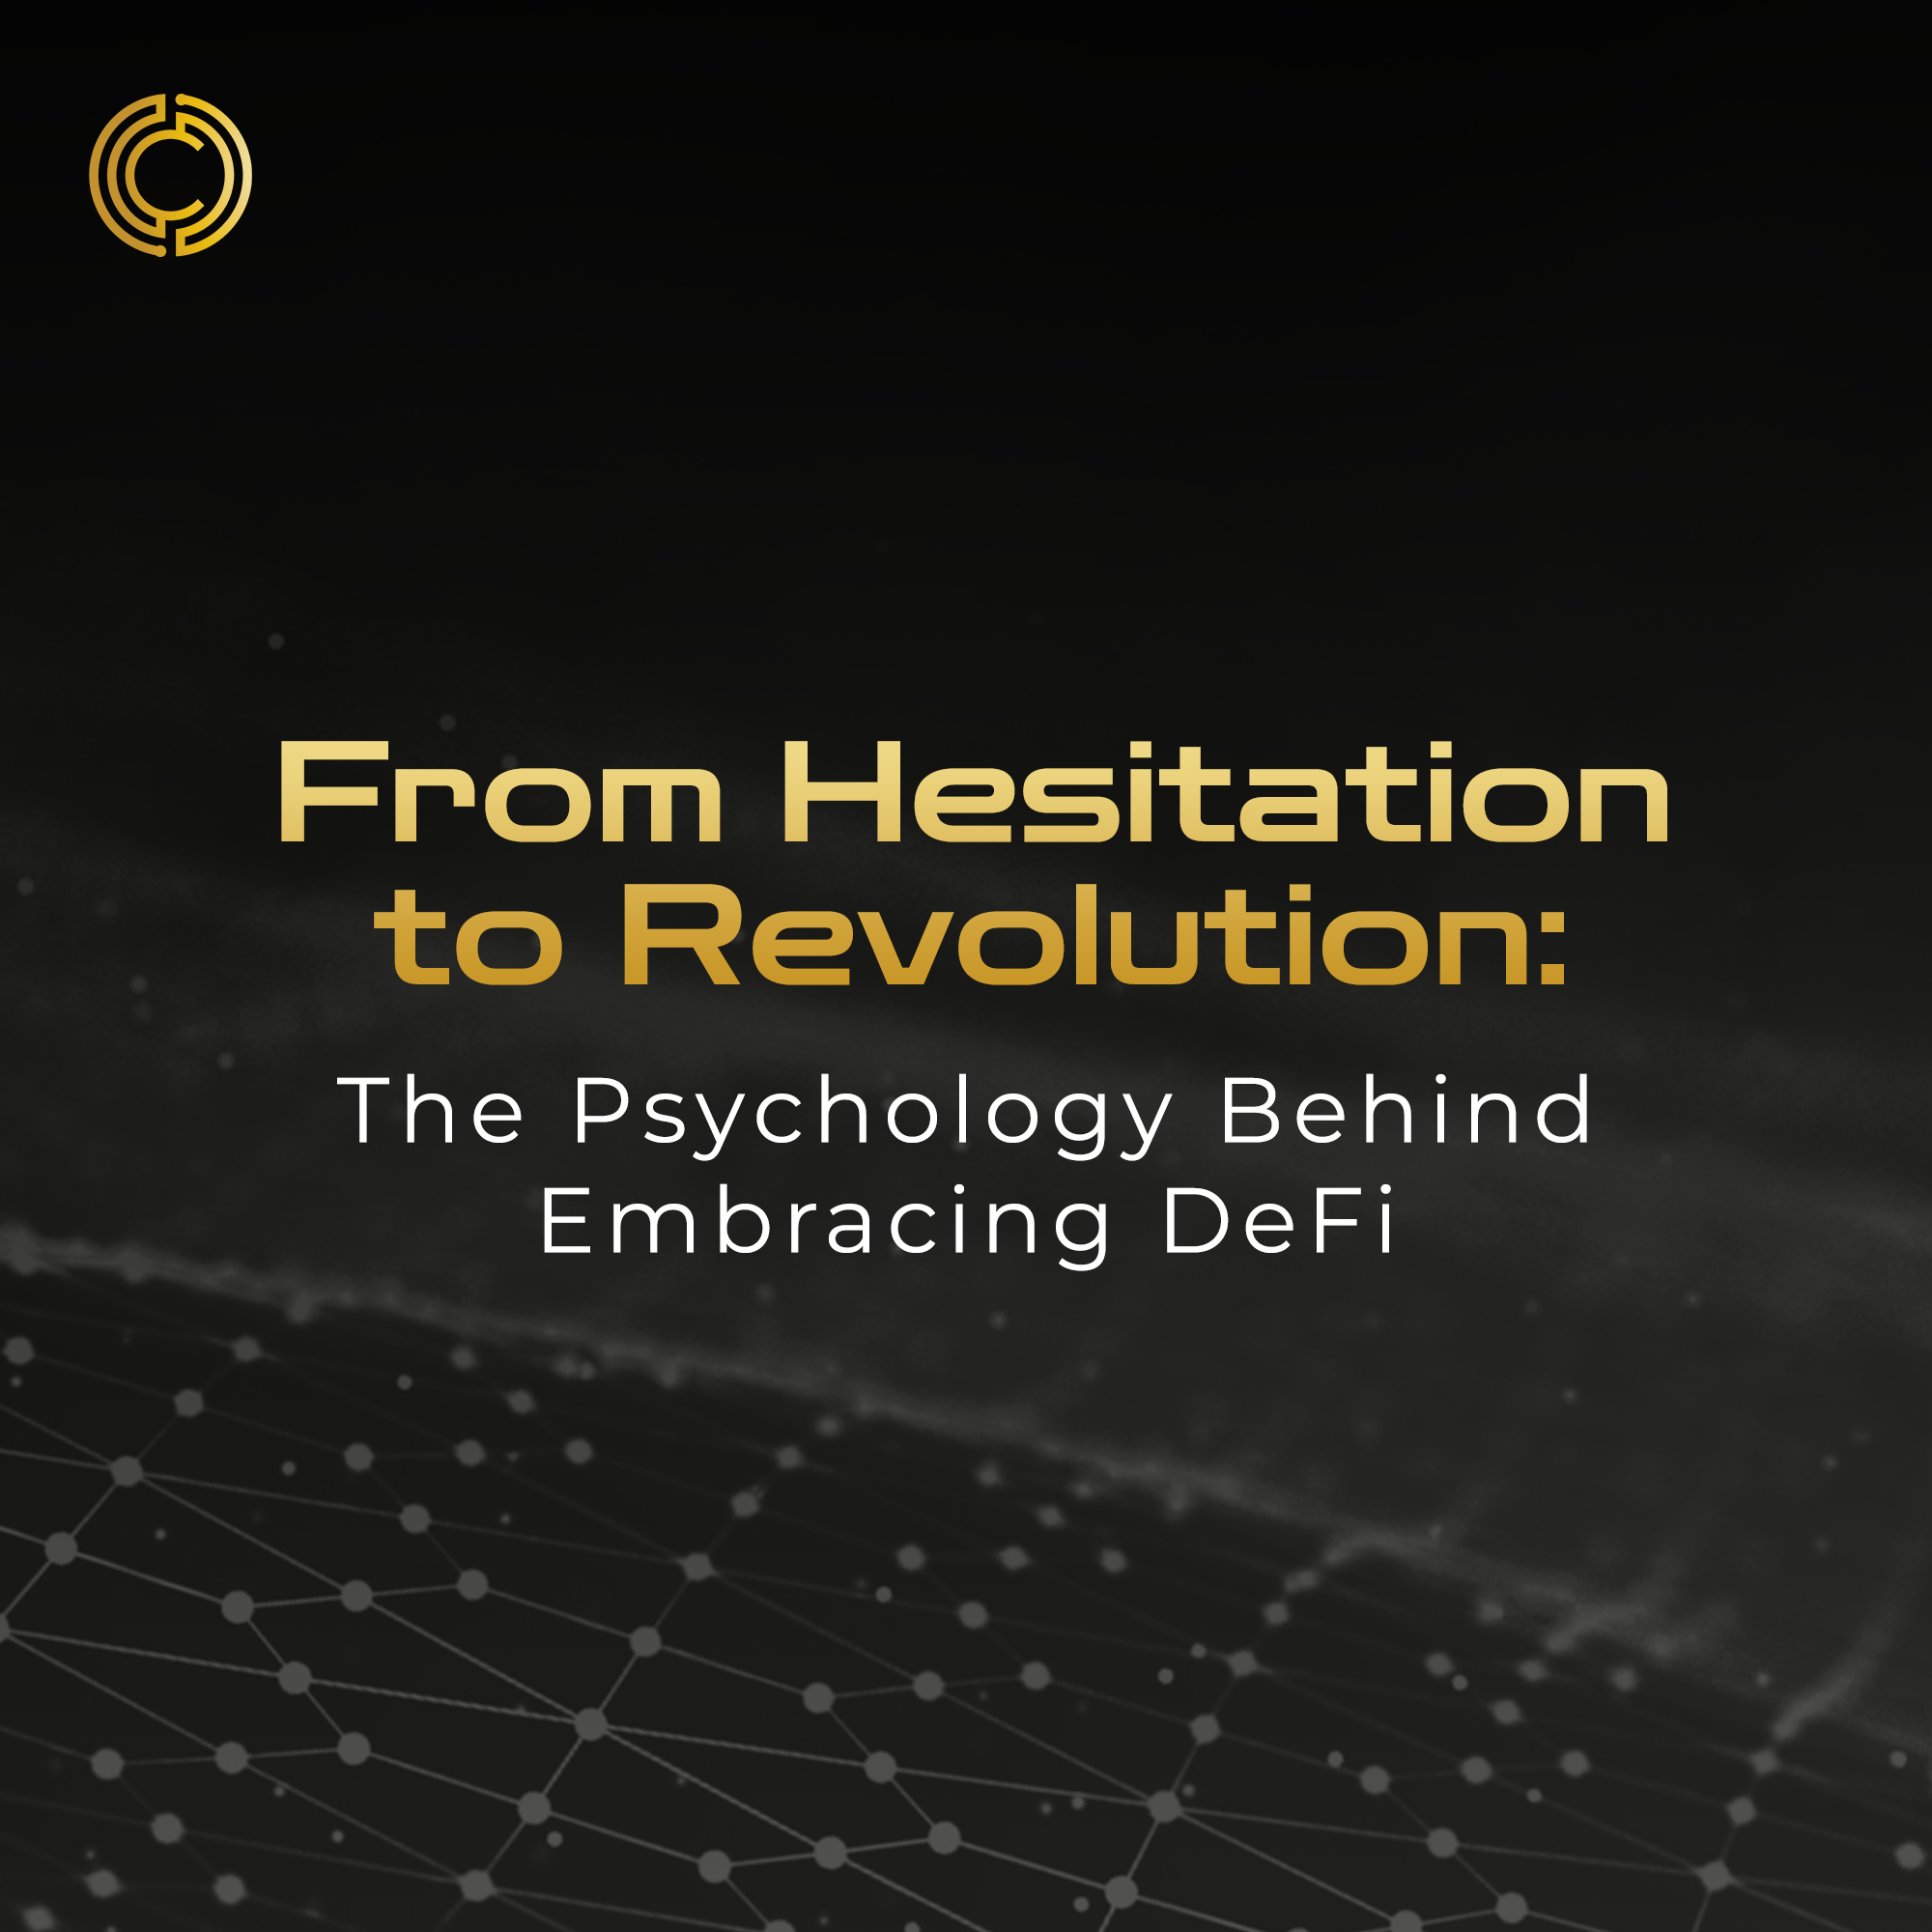 From Hesitation to Revolution: The Psychology Behind Embracing DeFi